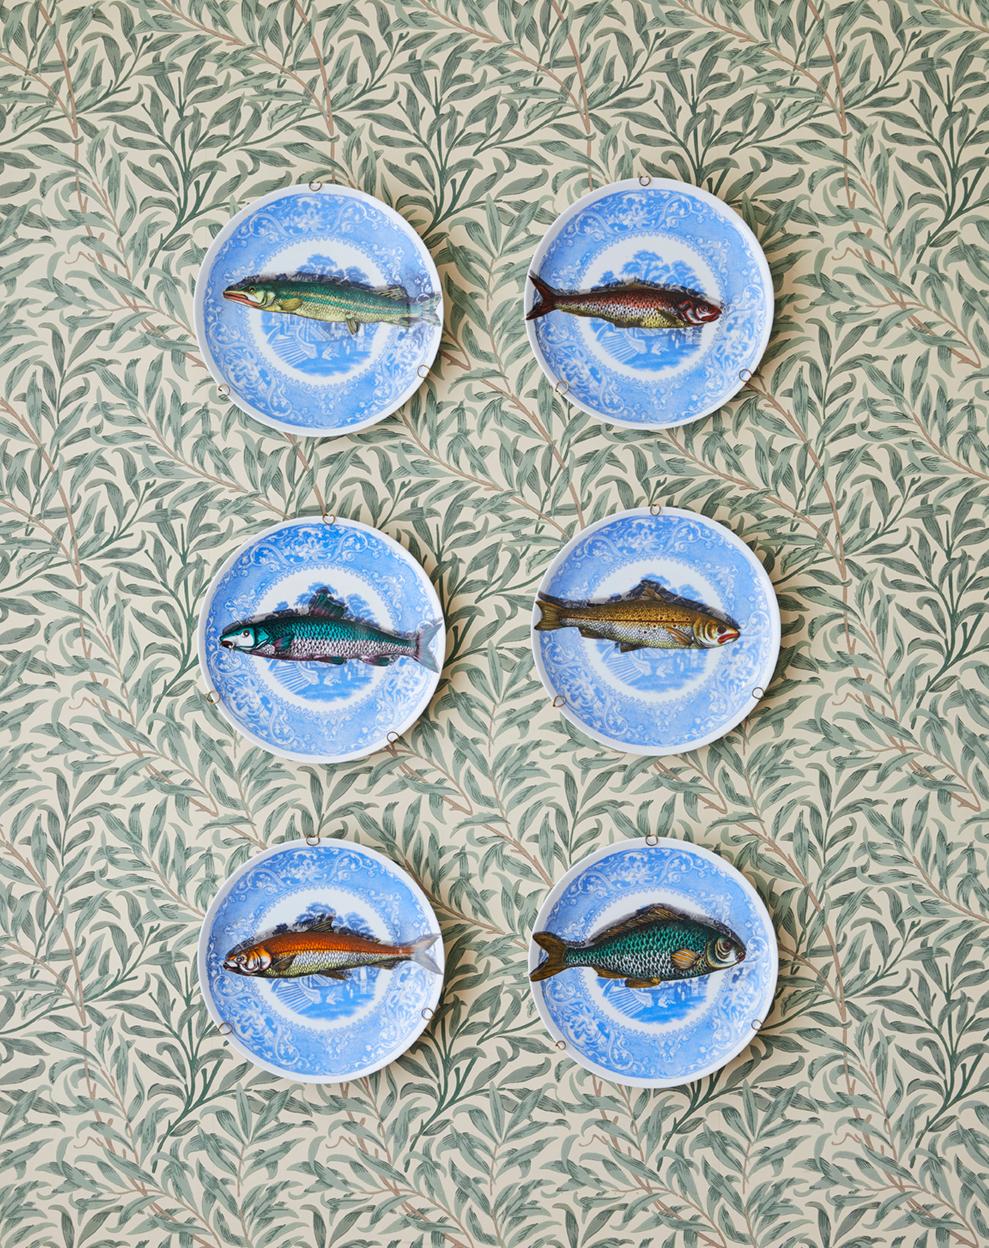 Piero Fornasetti
Italy, 1955

Six porcelain hanging platters with various printed polychrome fish on blue and white base. Stamped “Piscibus Fornasetti”. 

About
Italian painter, sculptor and illustrator Piero Fornasetti (1913-88) - famous for